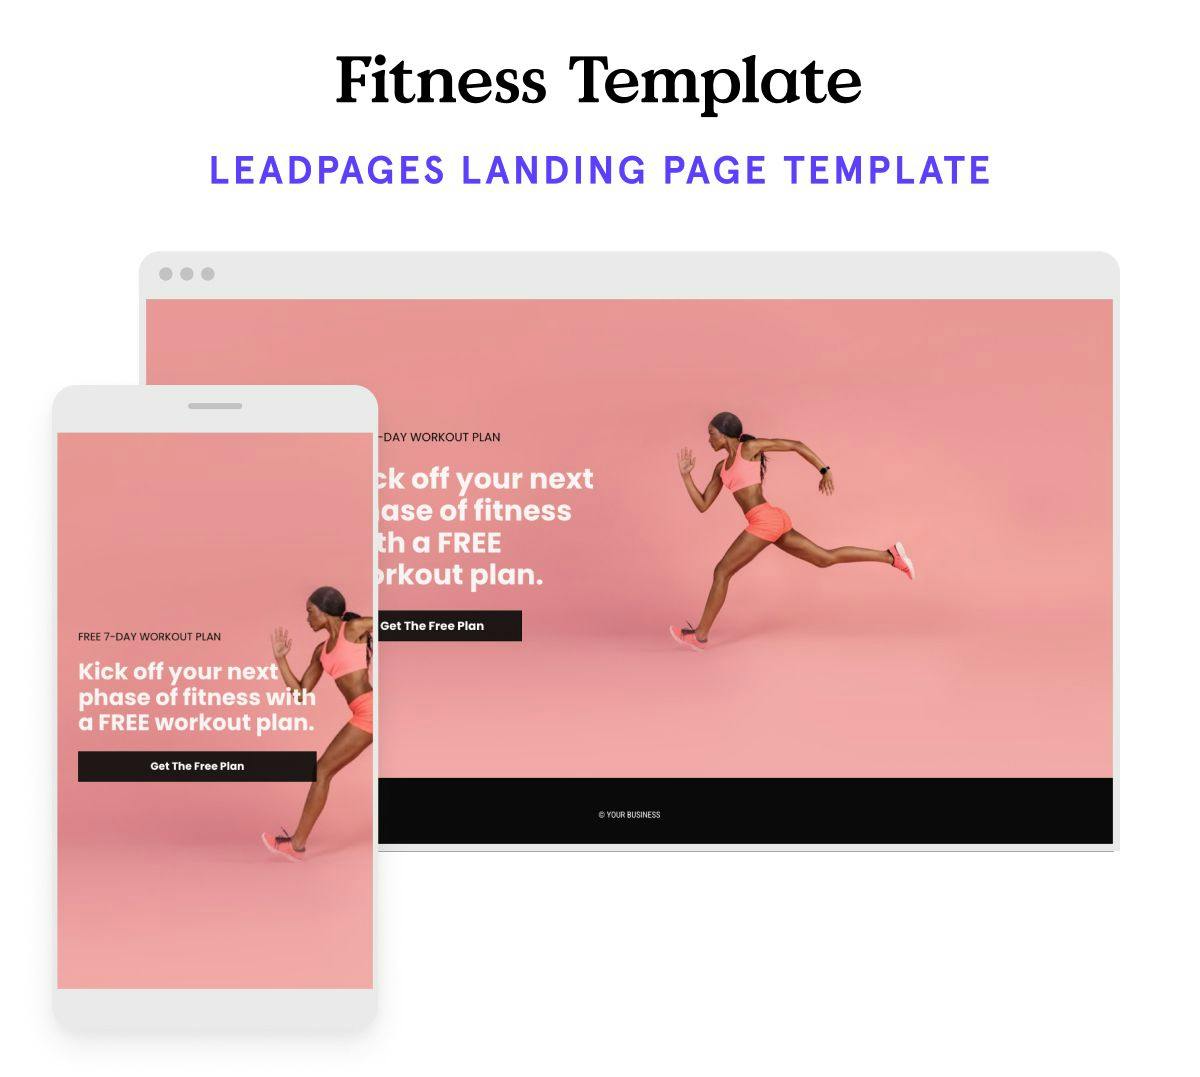 Fitness free trial landing page template